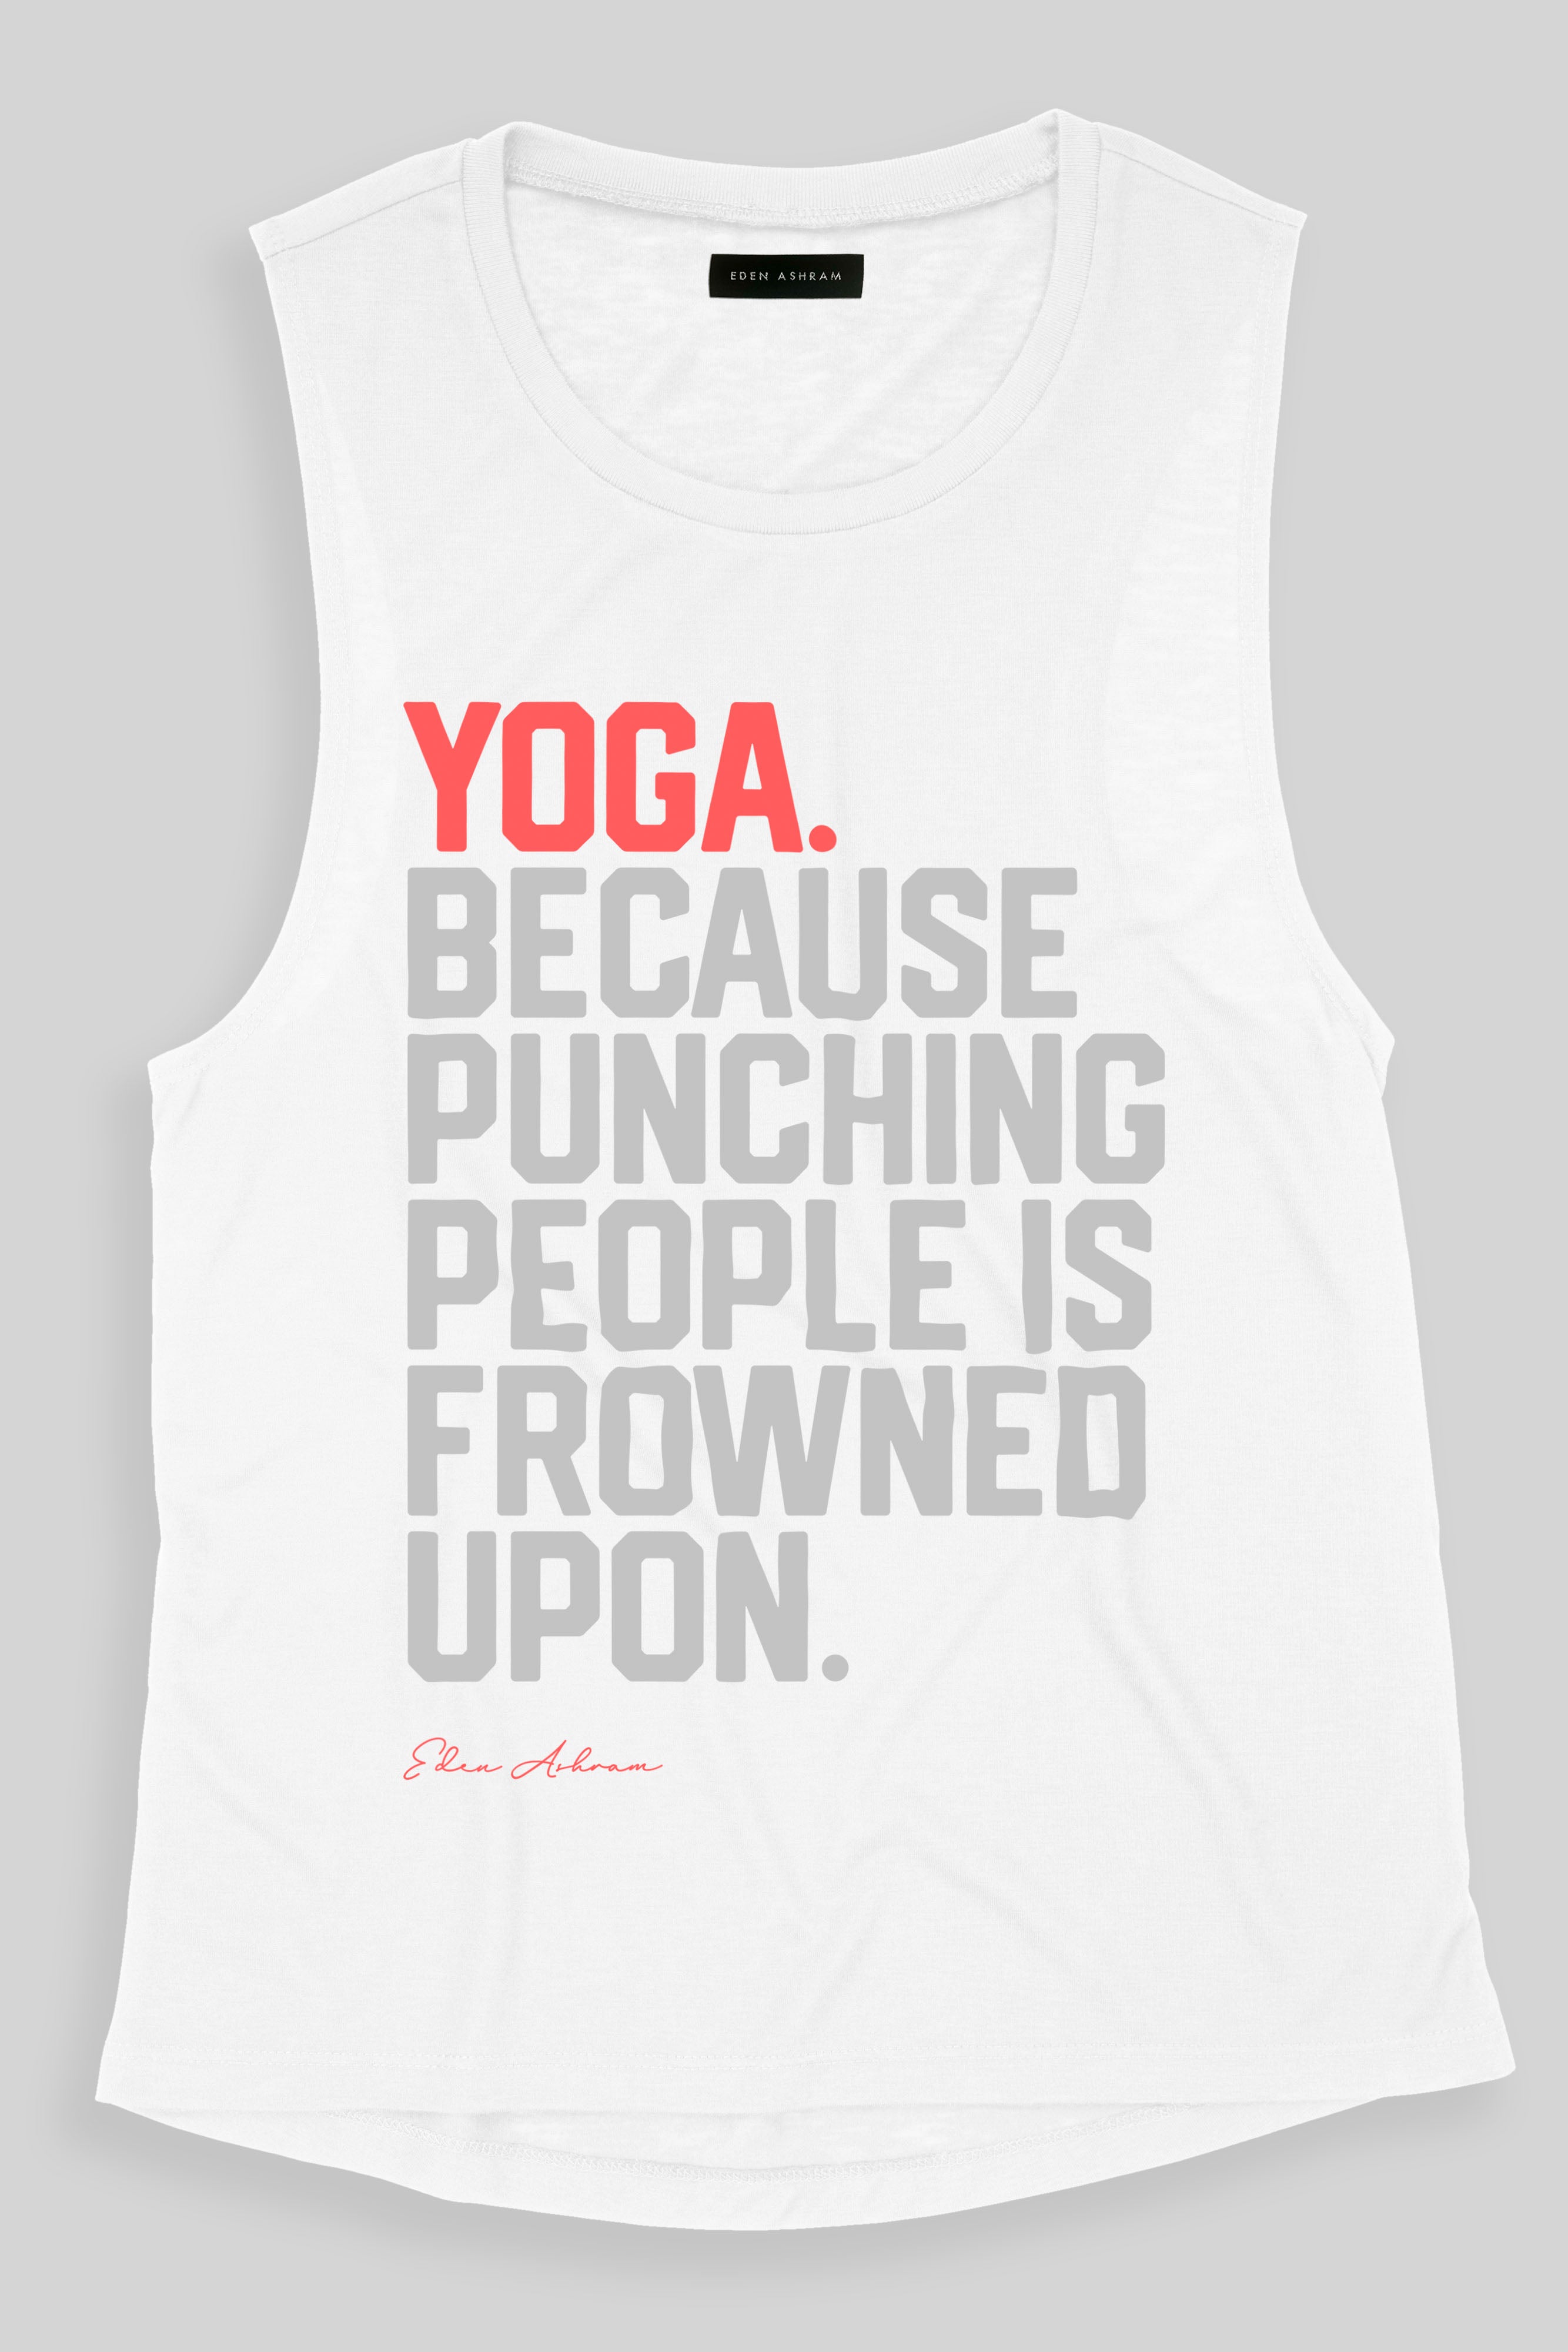 EDEN ASHRAM Yoga Because Punching People is Frowned Upon Super Soft Muscle Tank White